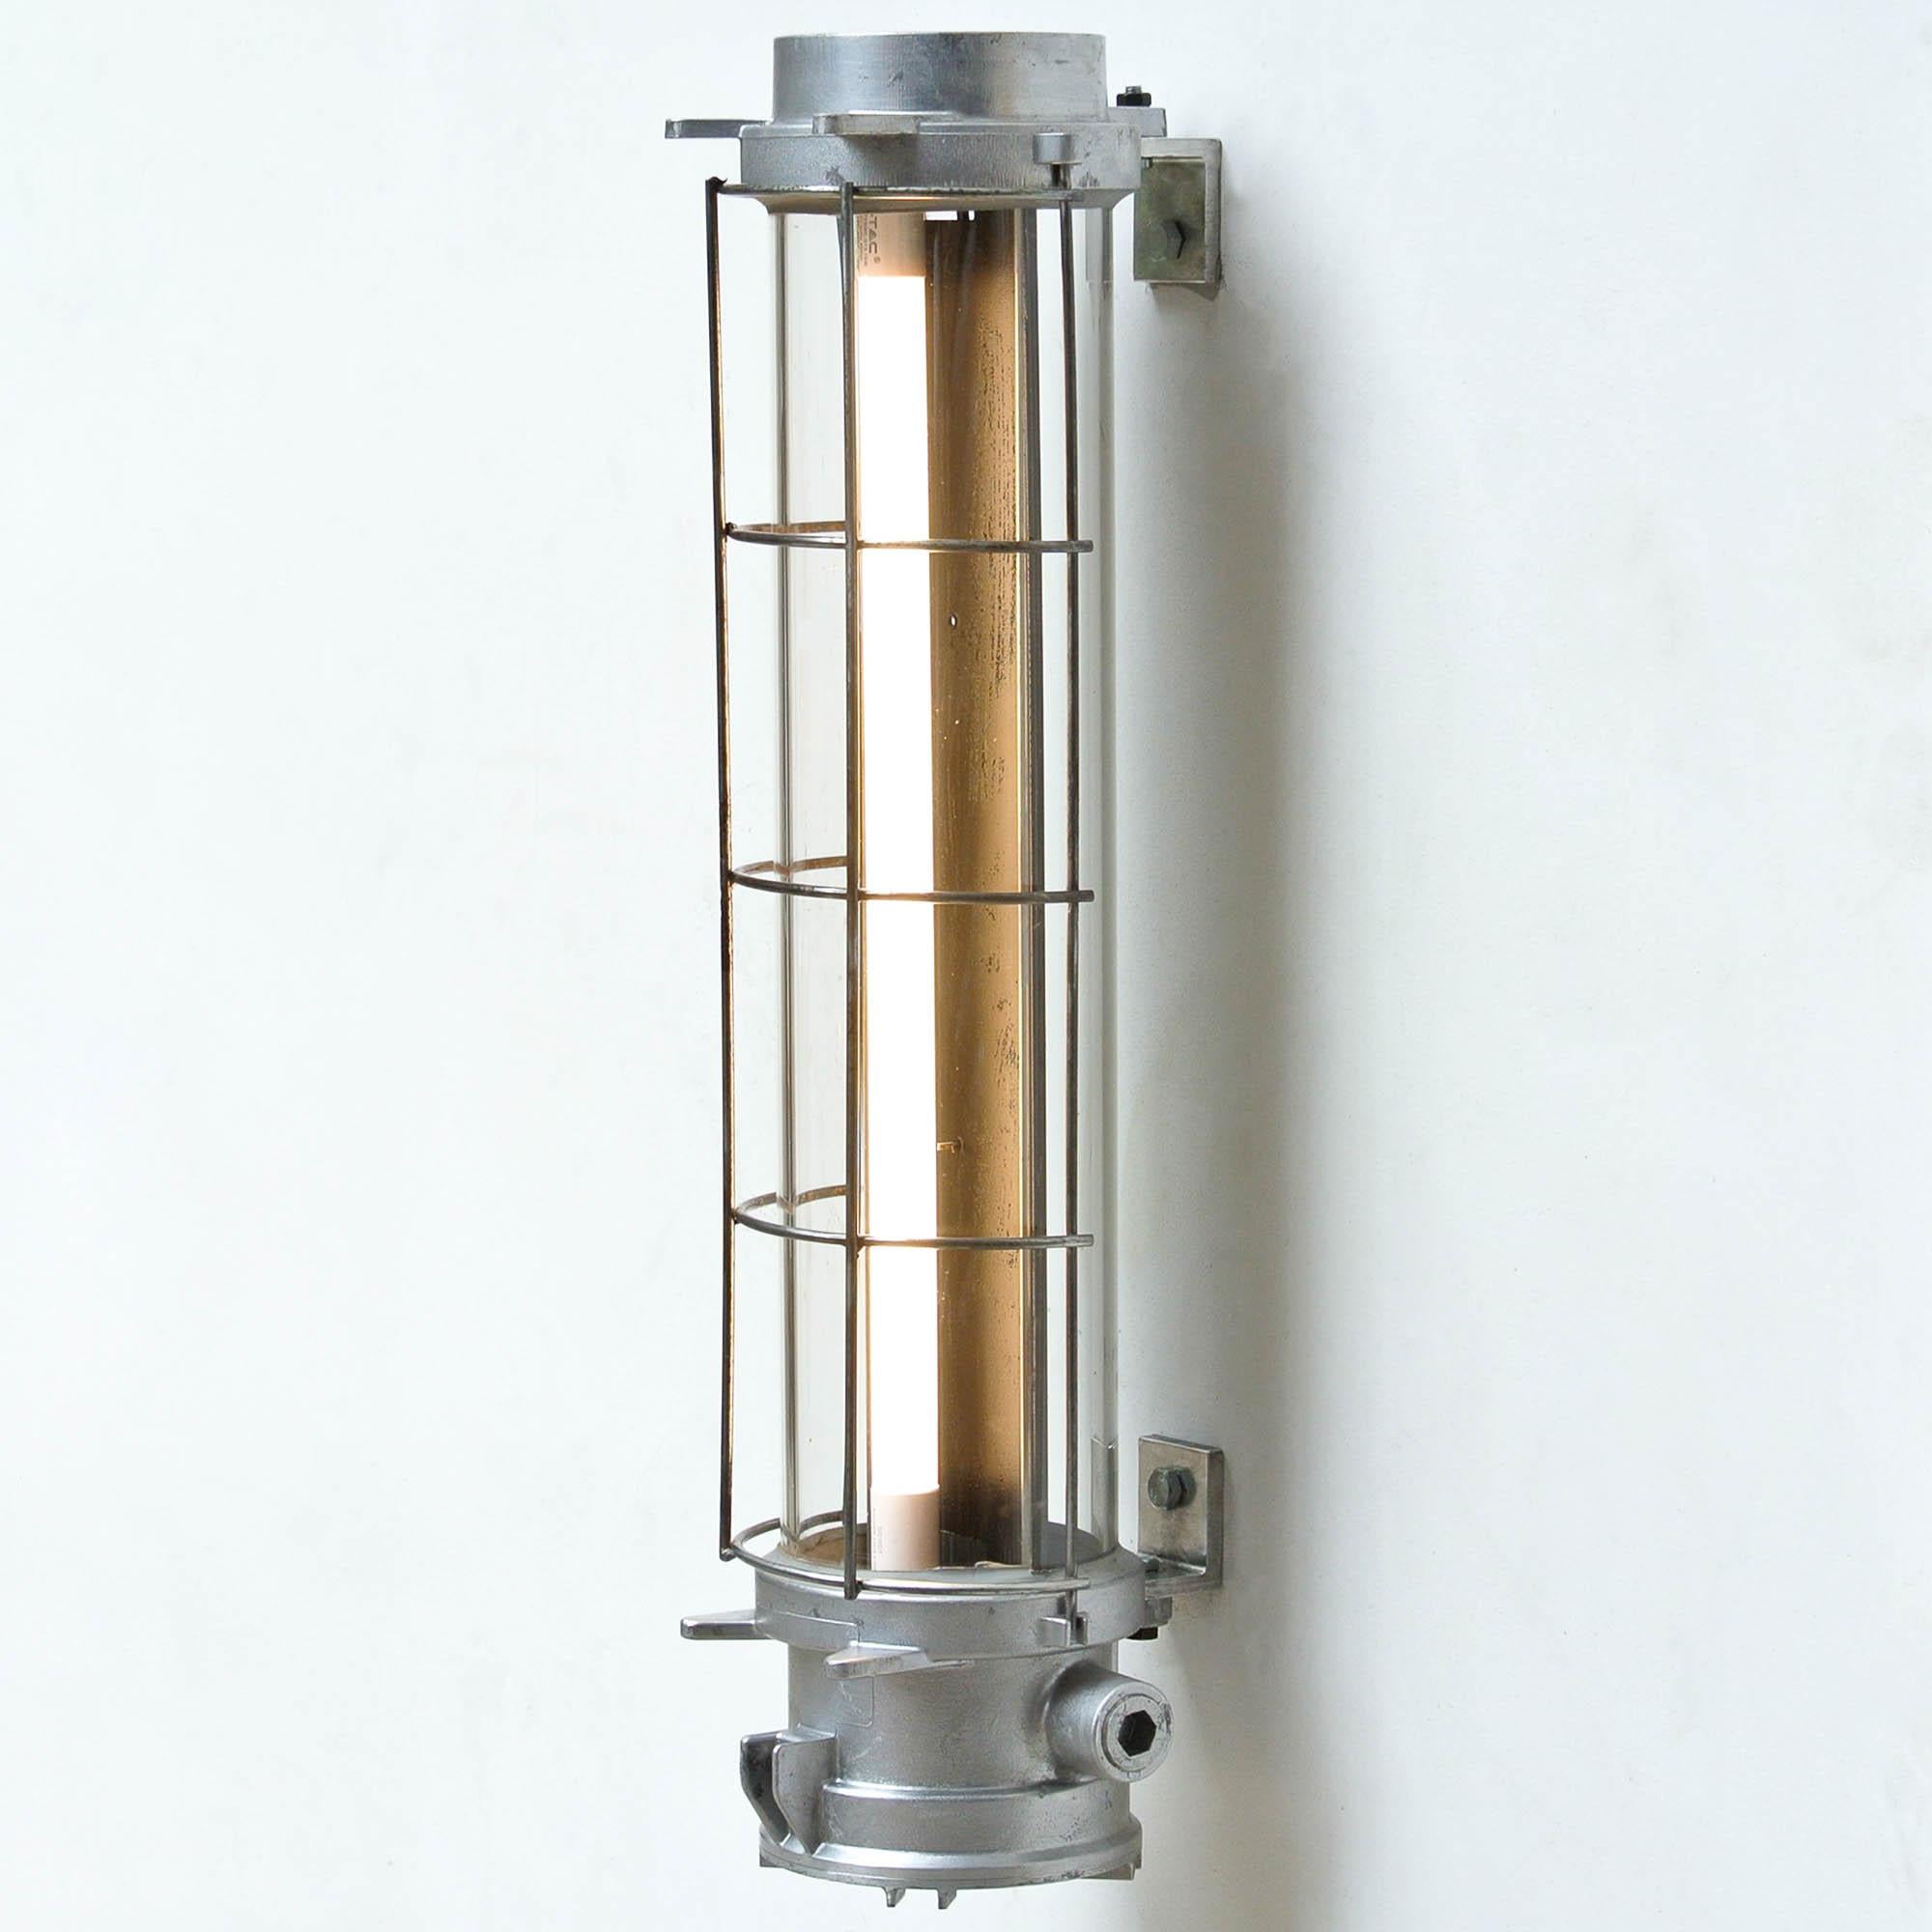 Late 20th Century Industrial Fluorescent Light in Cast Aluminium with a Fence, circa 1970-1979 For Sale